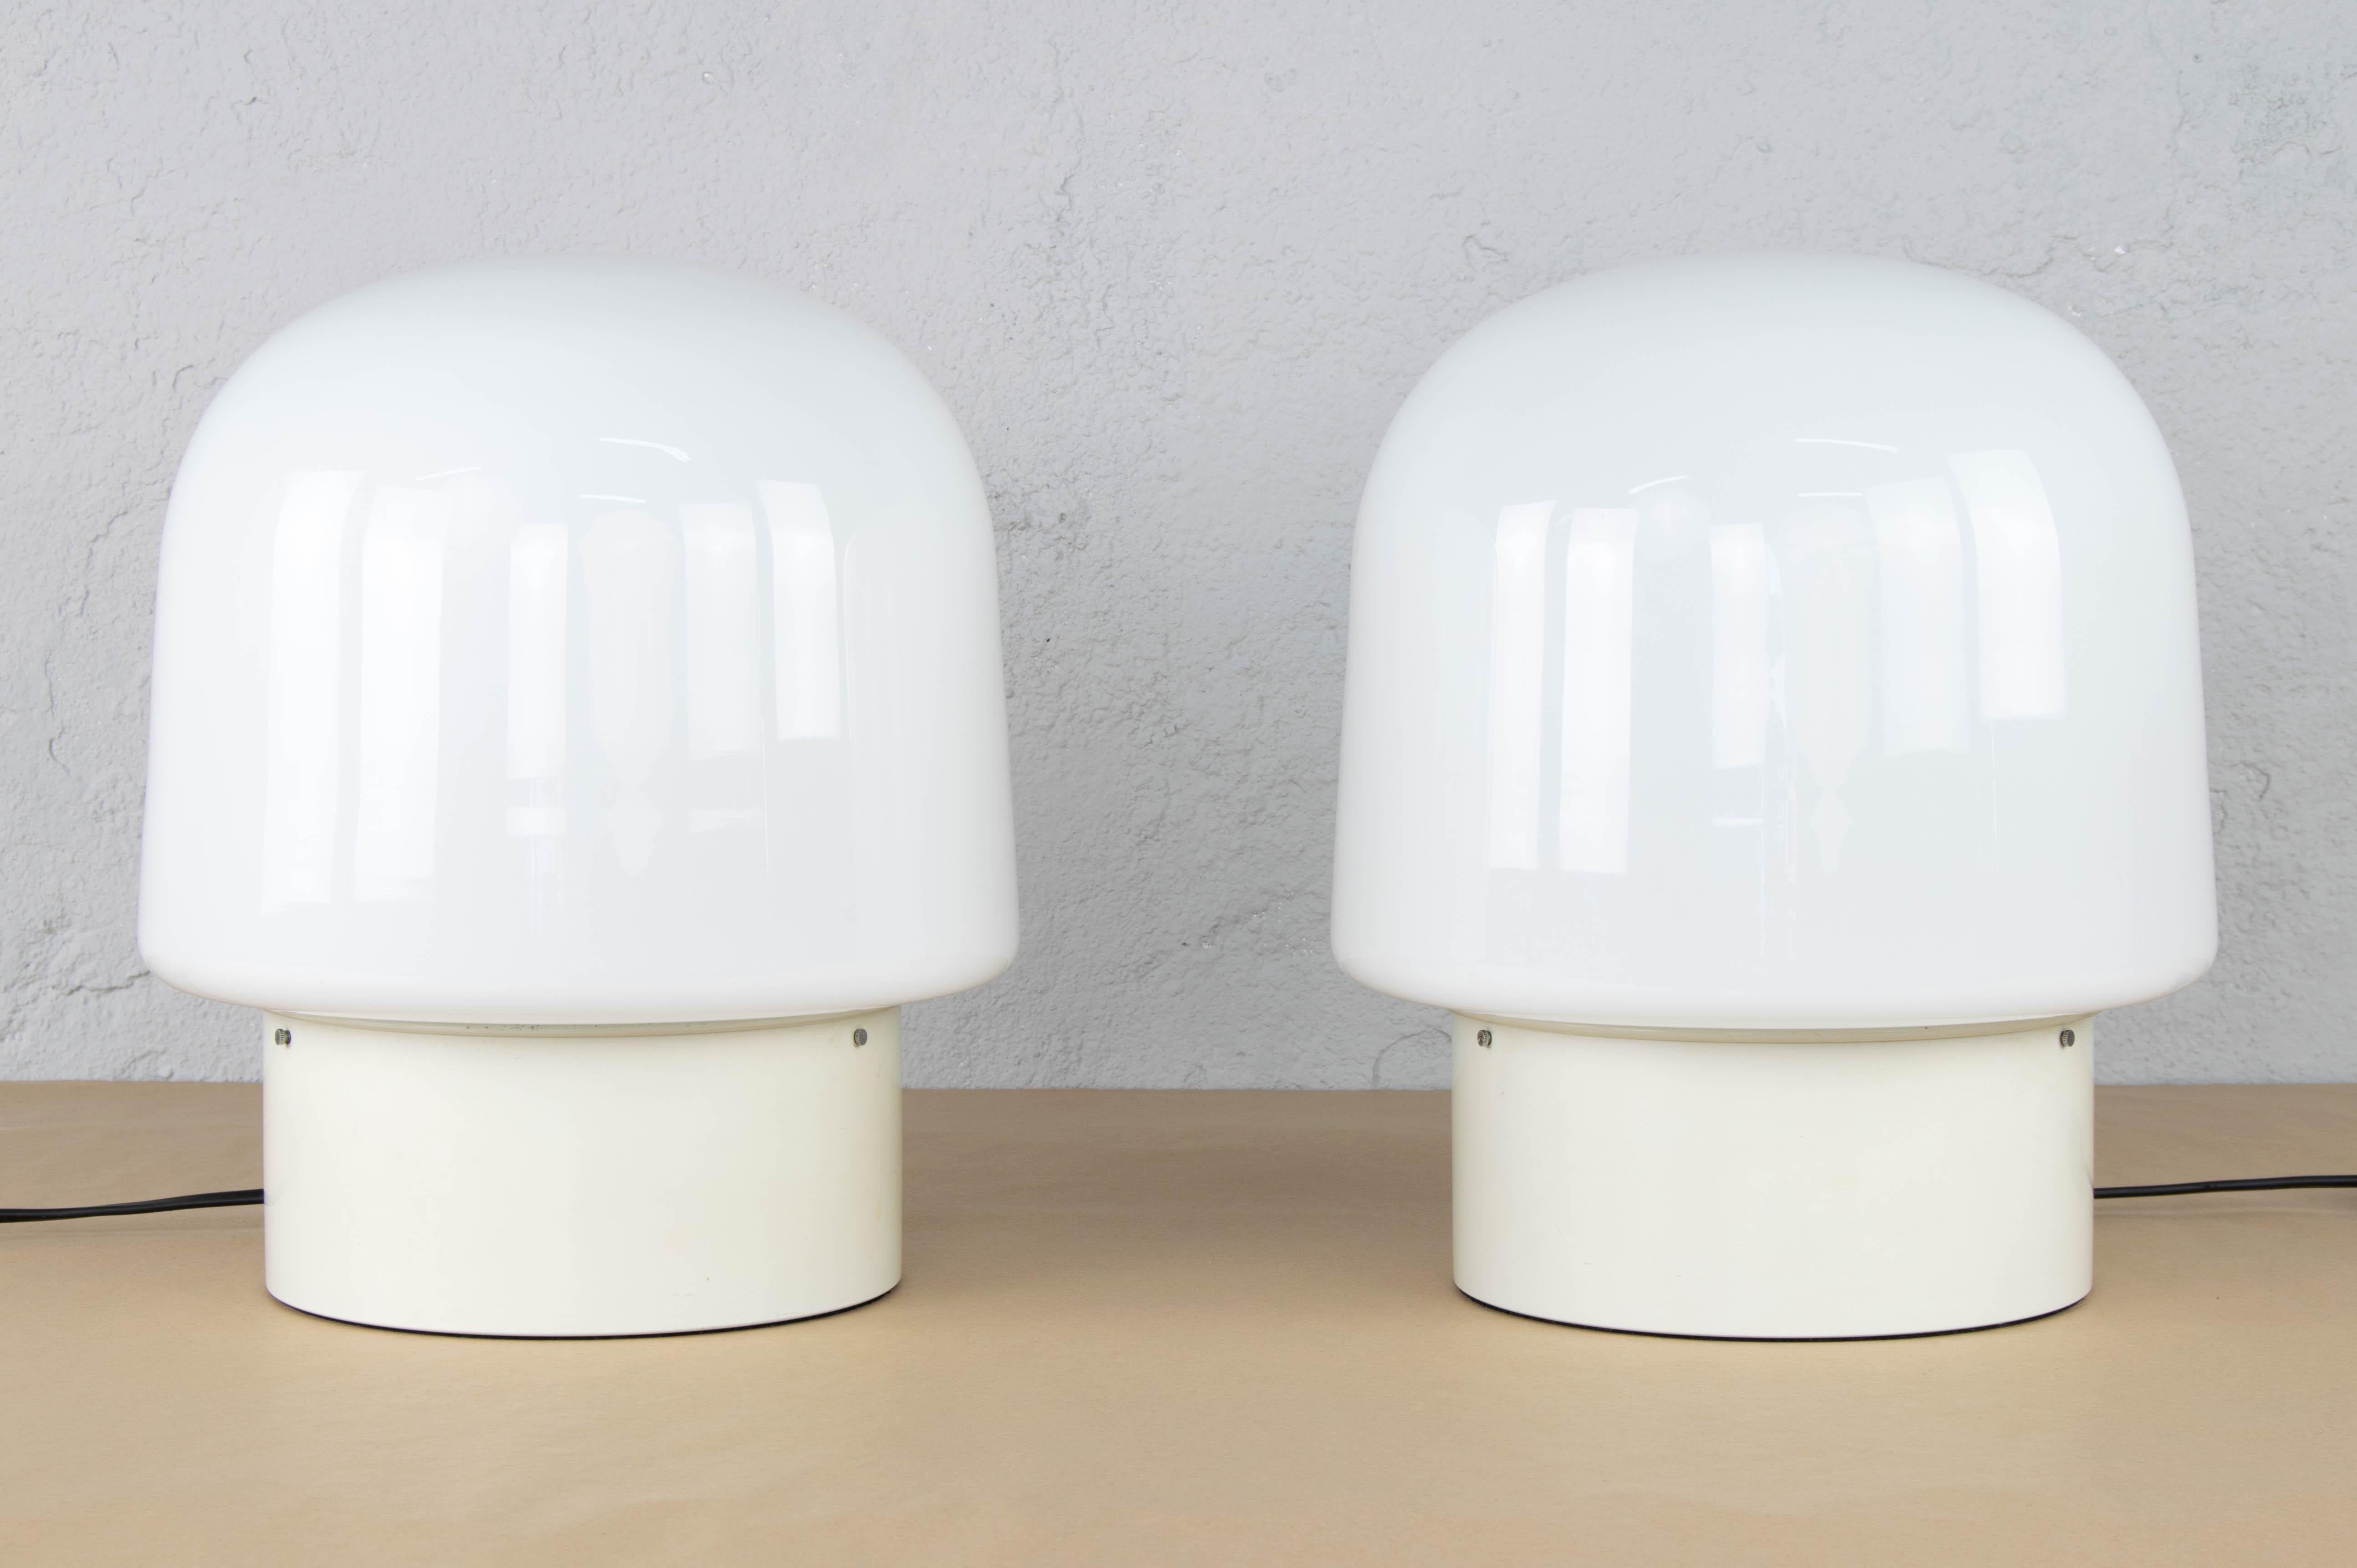 Pair of tabletop mushroom lamps produced by the Spanish firm Metalarte in the 1970s. Modern design of clean and warm lines. White lacquered steel body with E27 ceramic socket and lamp shade in the form of a white opaline glass capsule and light